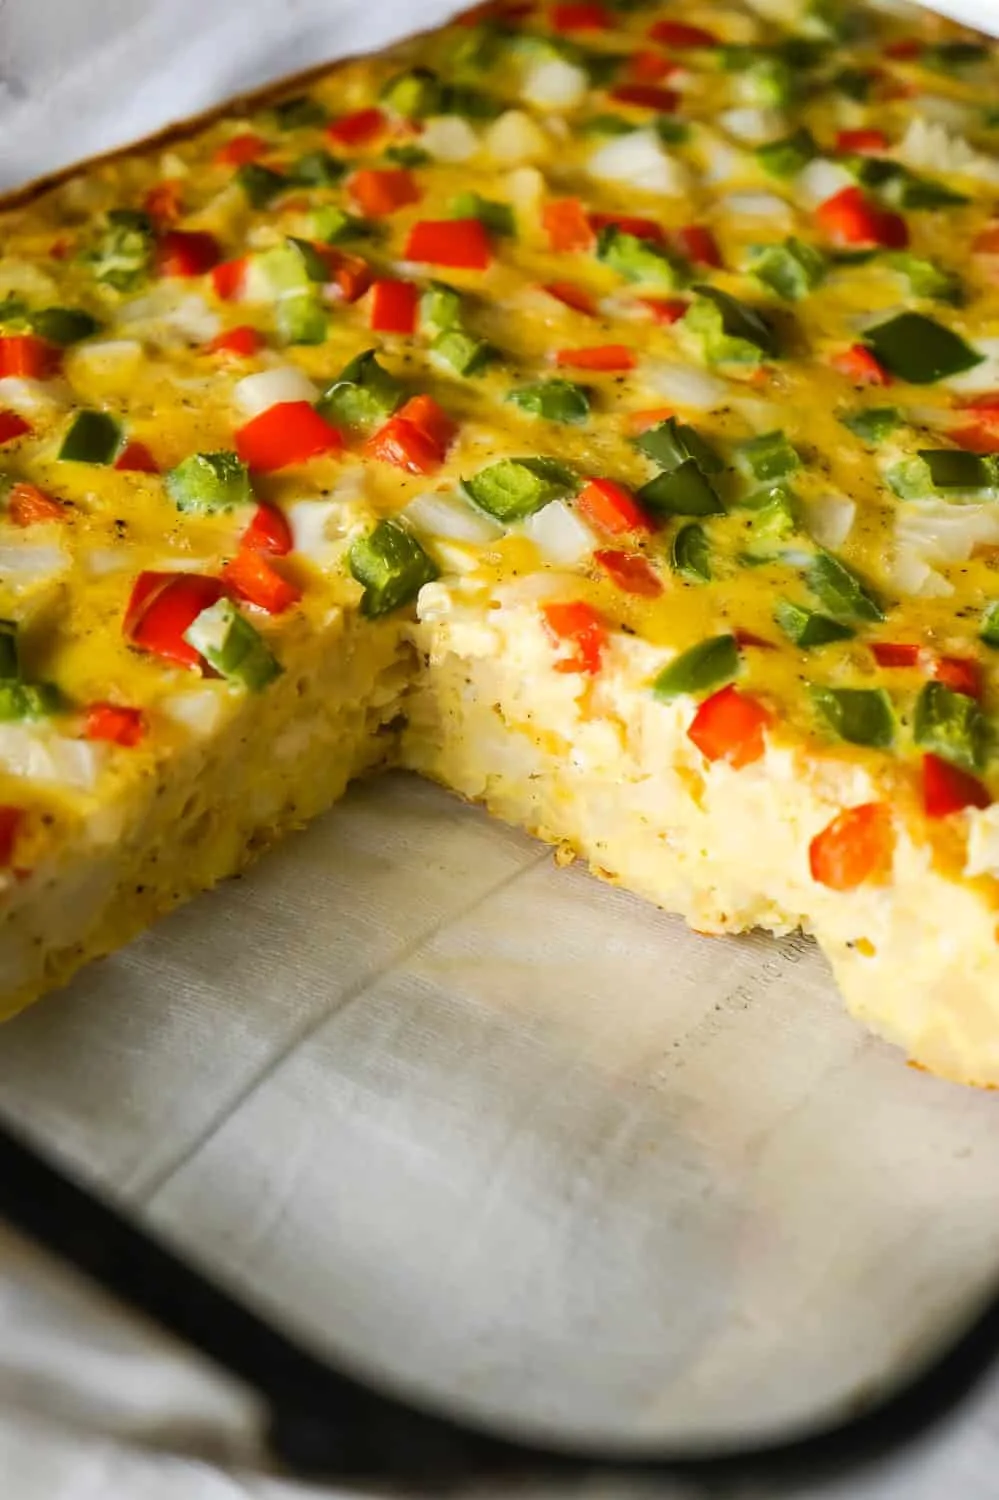 Egg Casserole with Hash Browns is a an easy breakfast recipe made with diced hash brown potatoes and loaded with onions, green peppers and red peppers.